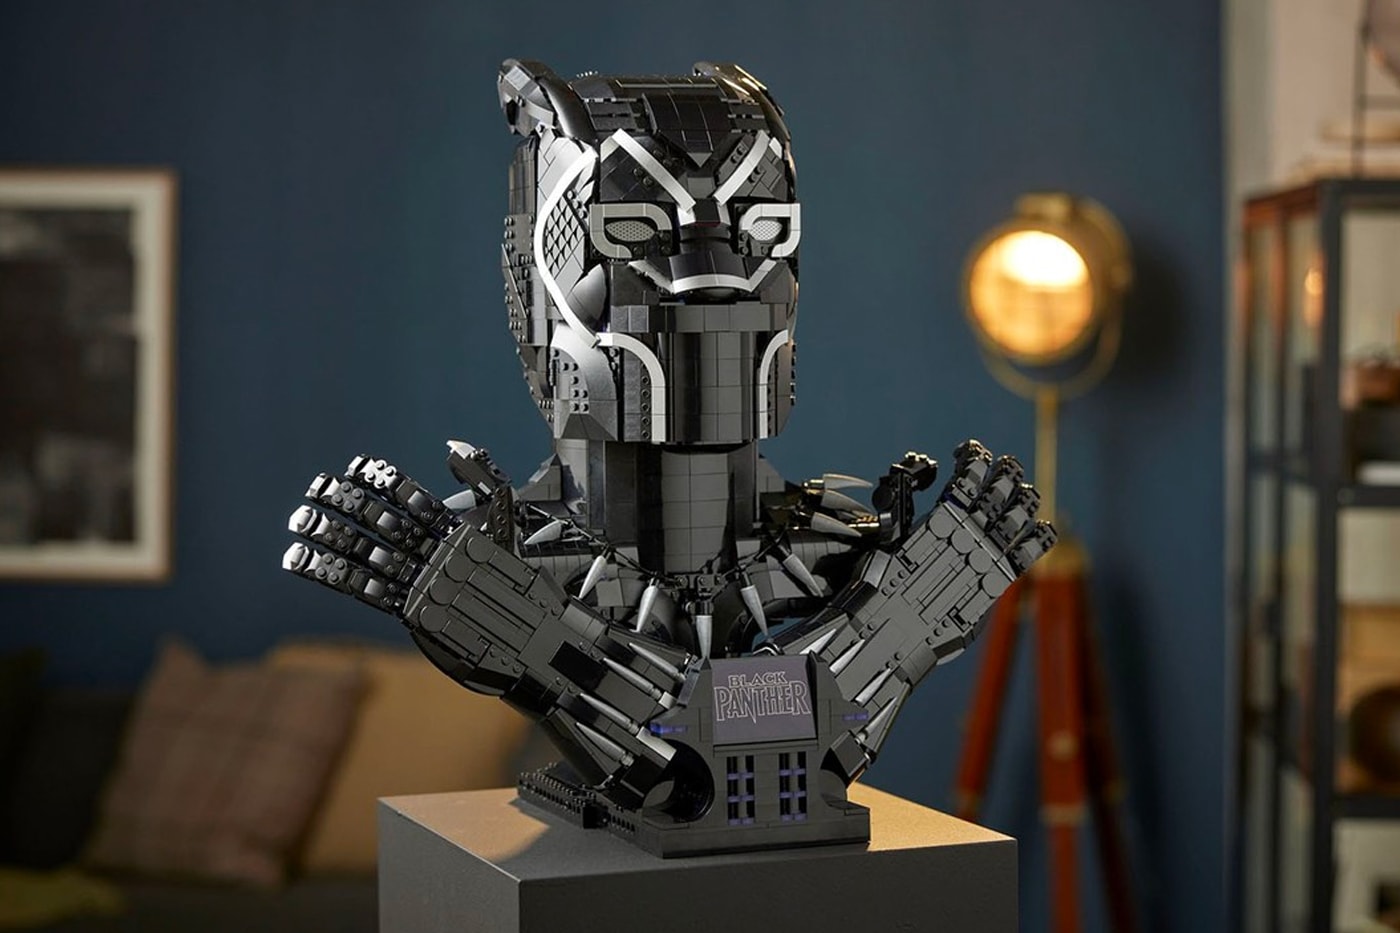 LEGO Black Panther life size scale wakanda forever king t challa release info date price 349 usd necklace gloves